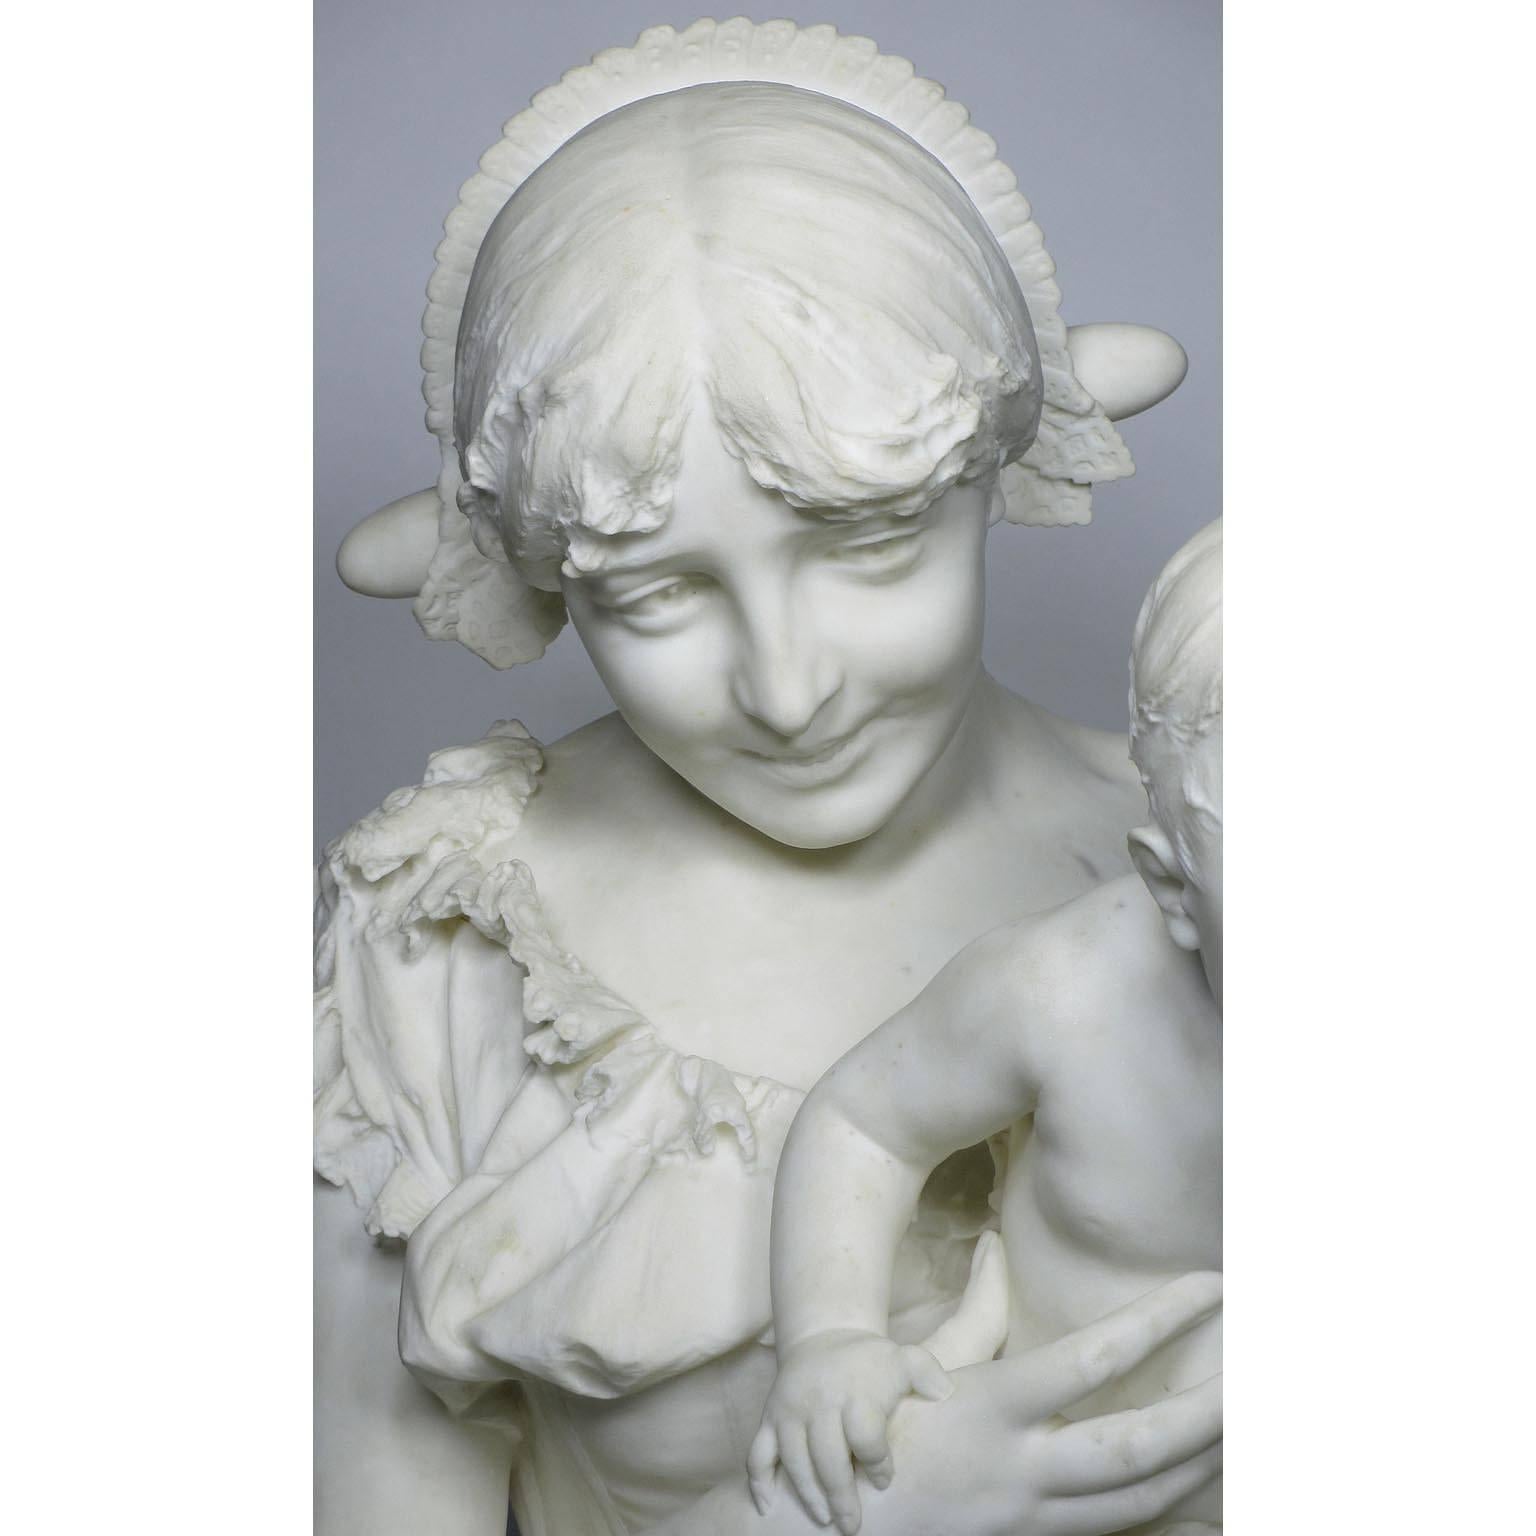 A very fine and charming Italian 19th century life-size Carrara marble sculpture of 